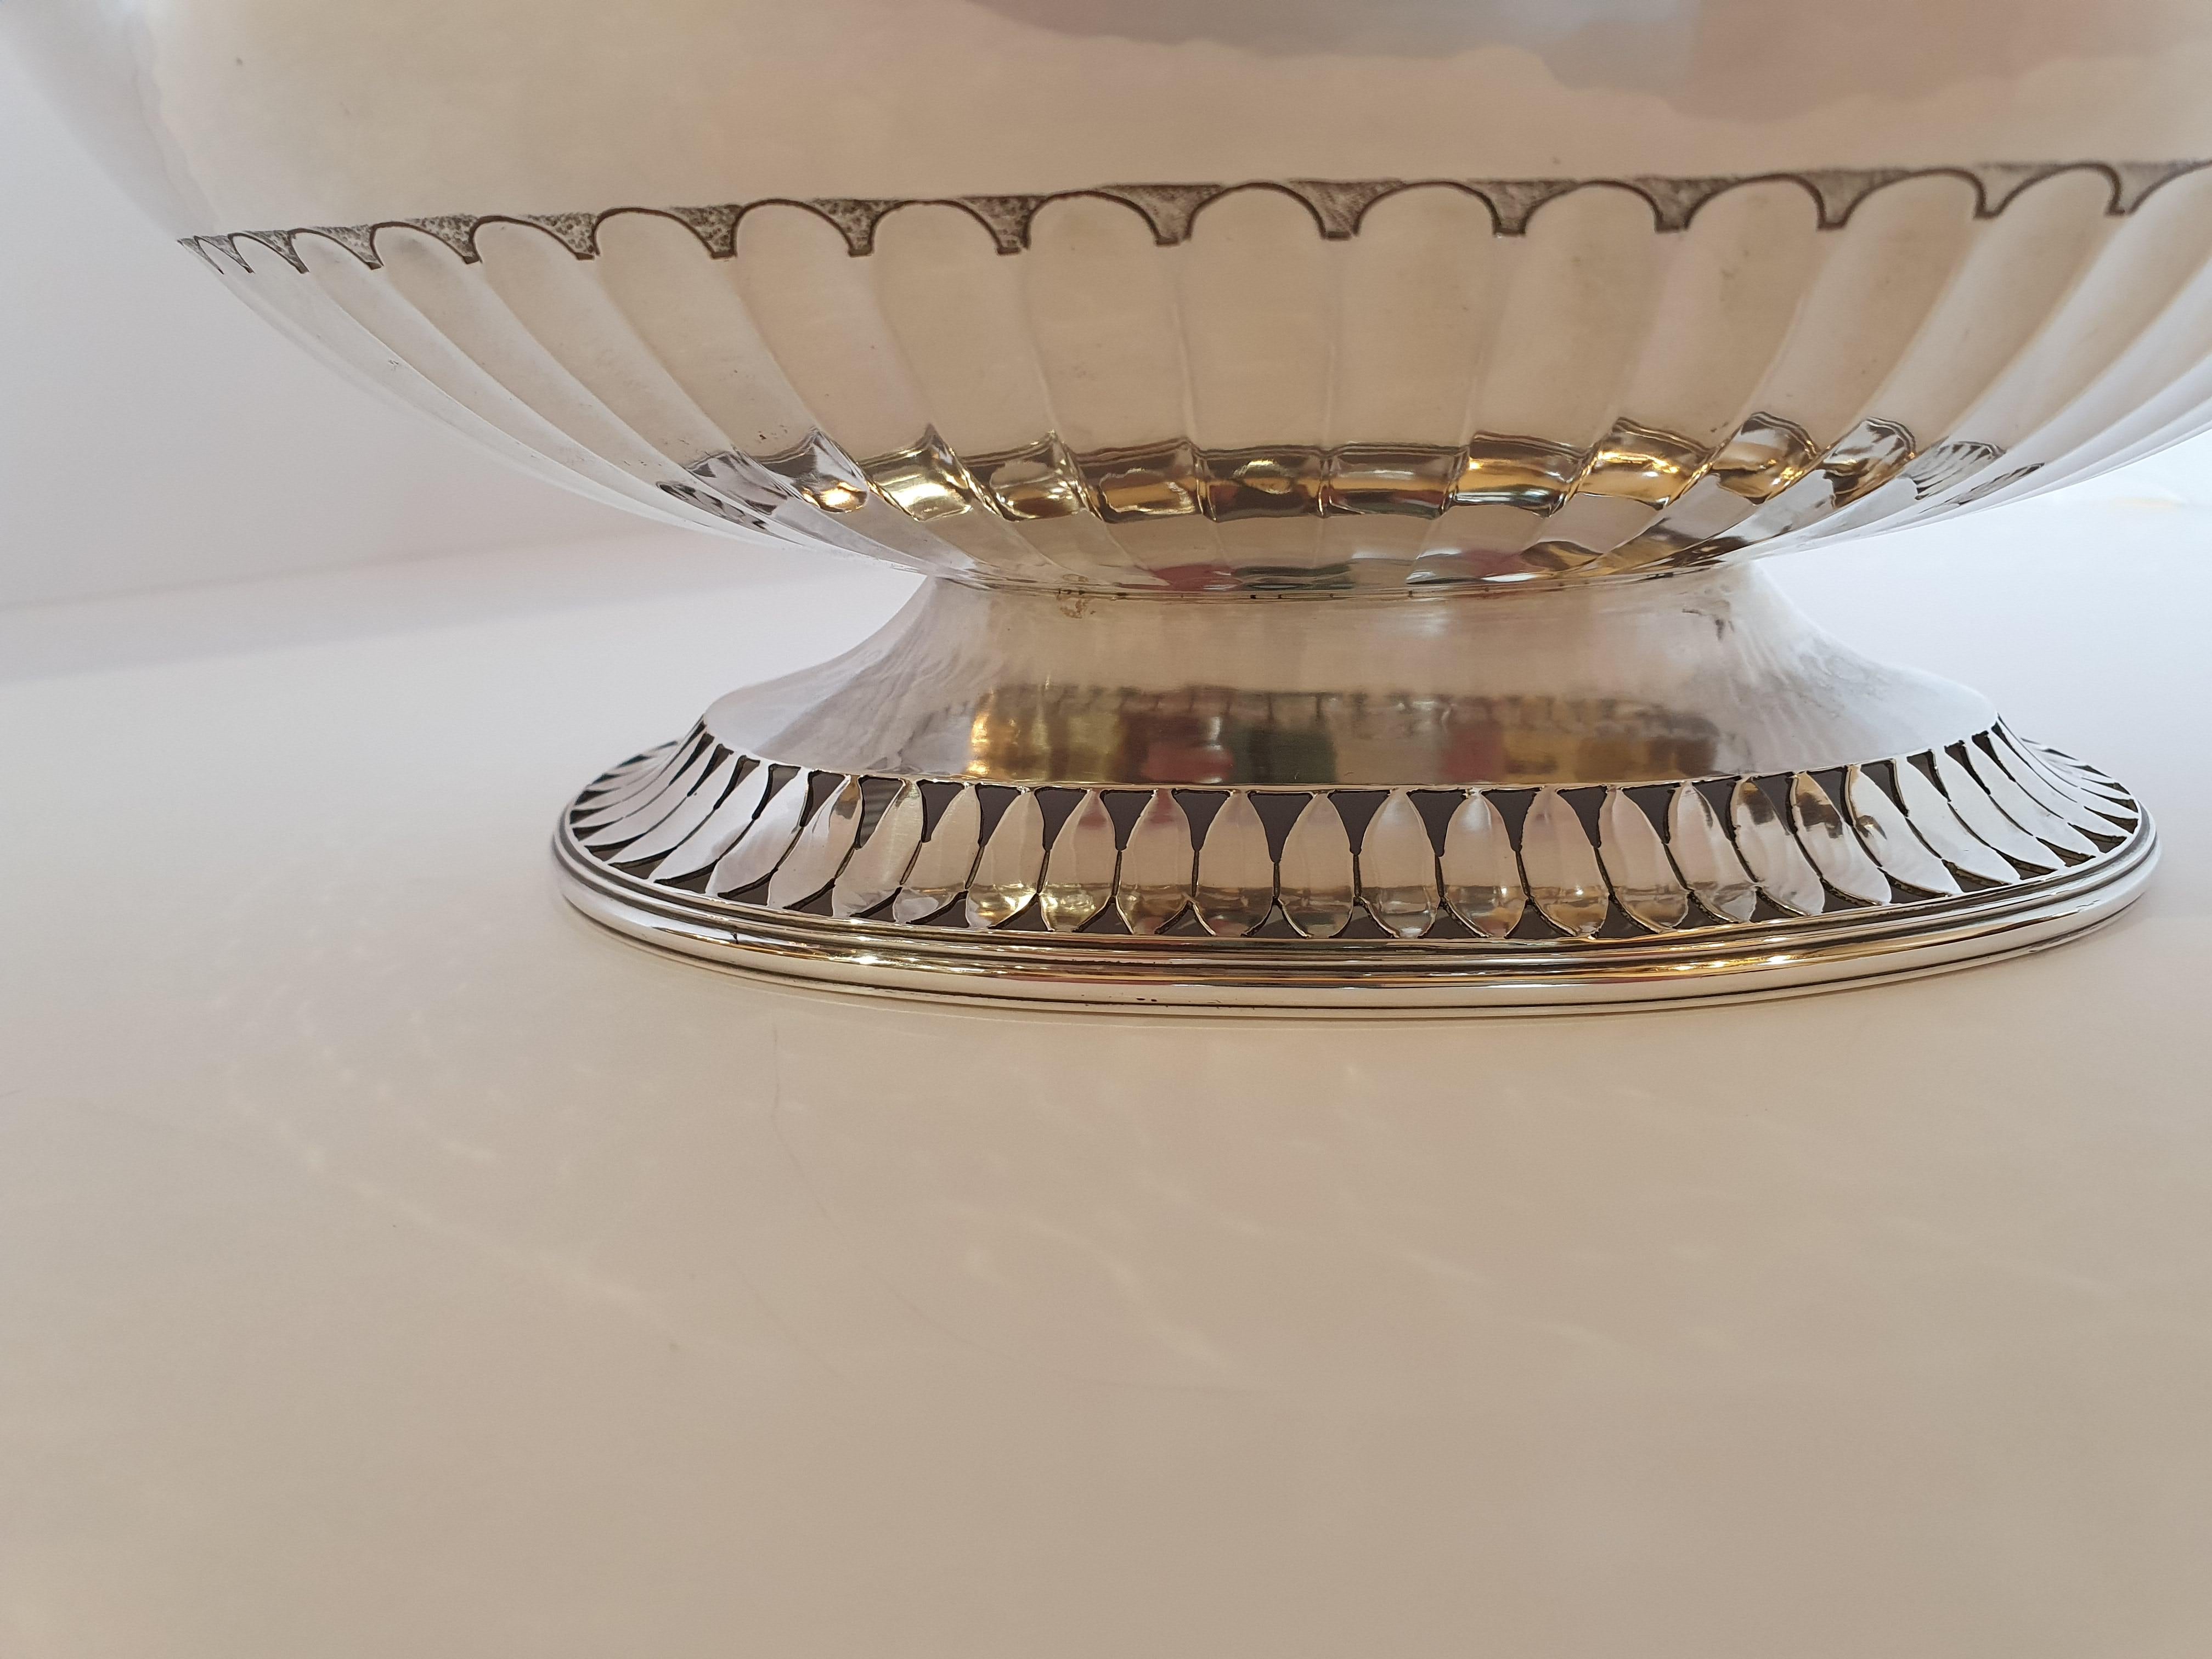 Wonderful oval Empire style centerpiece with foot made in sterling silver by Ilario Pradella for Bellezza Cagliari. New, never used
Pradella Iario, founded in 1920, was the greatest Italian silversmith of the second half of the 20th century, famous